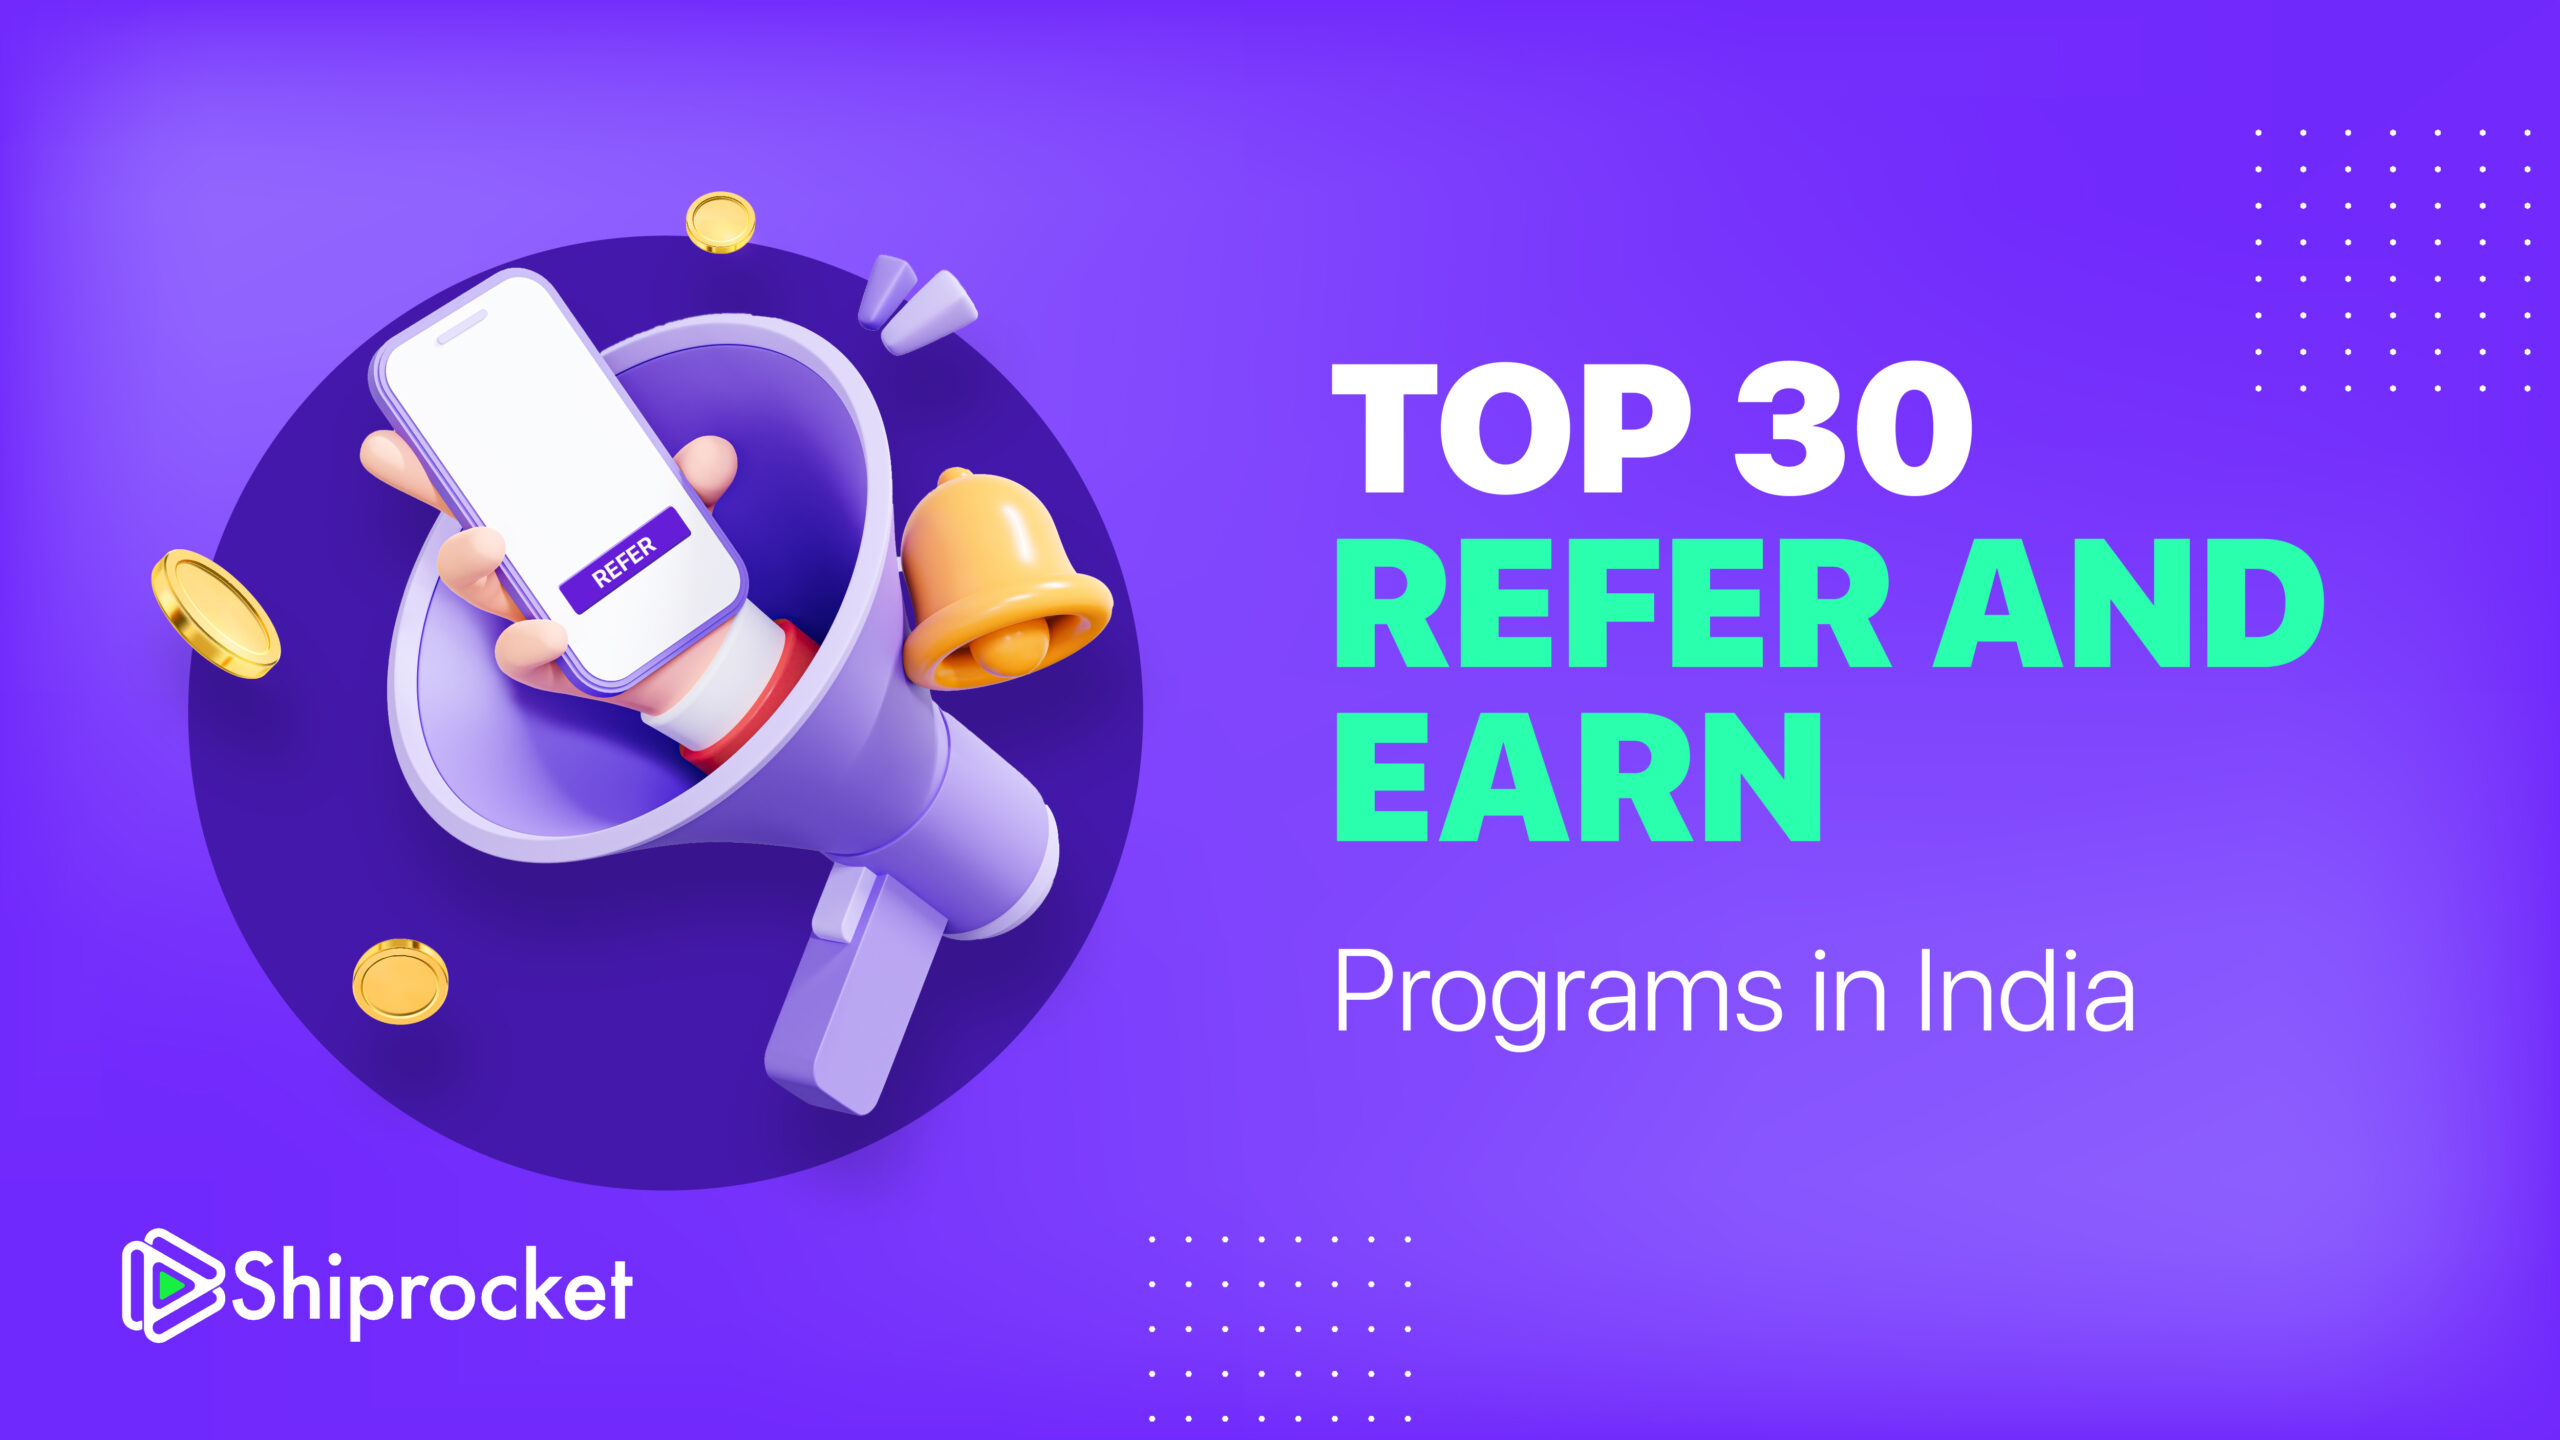 refer and earn programs in india